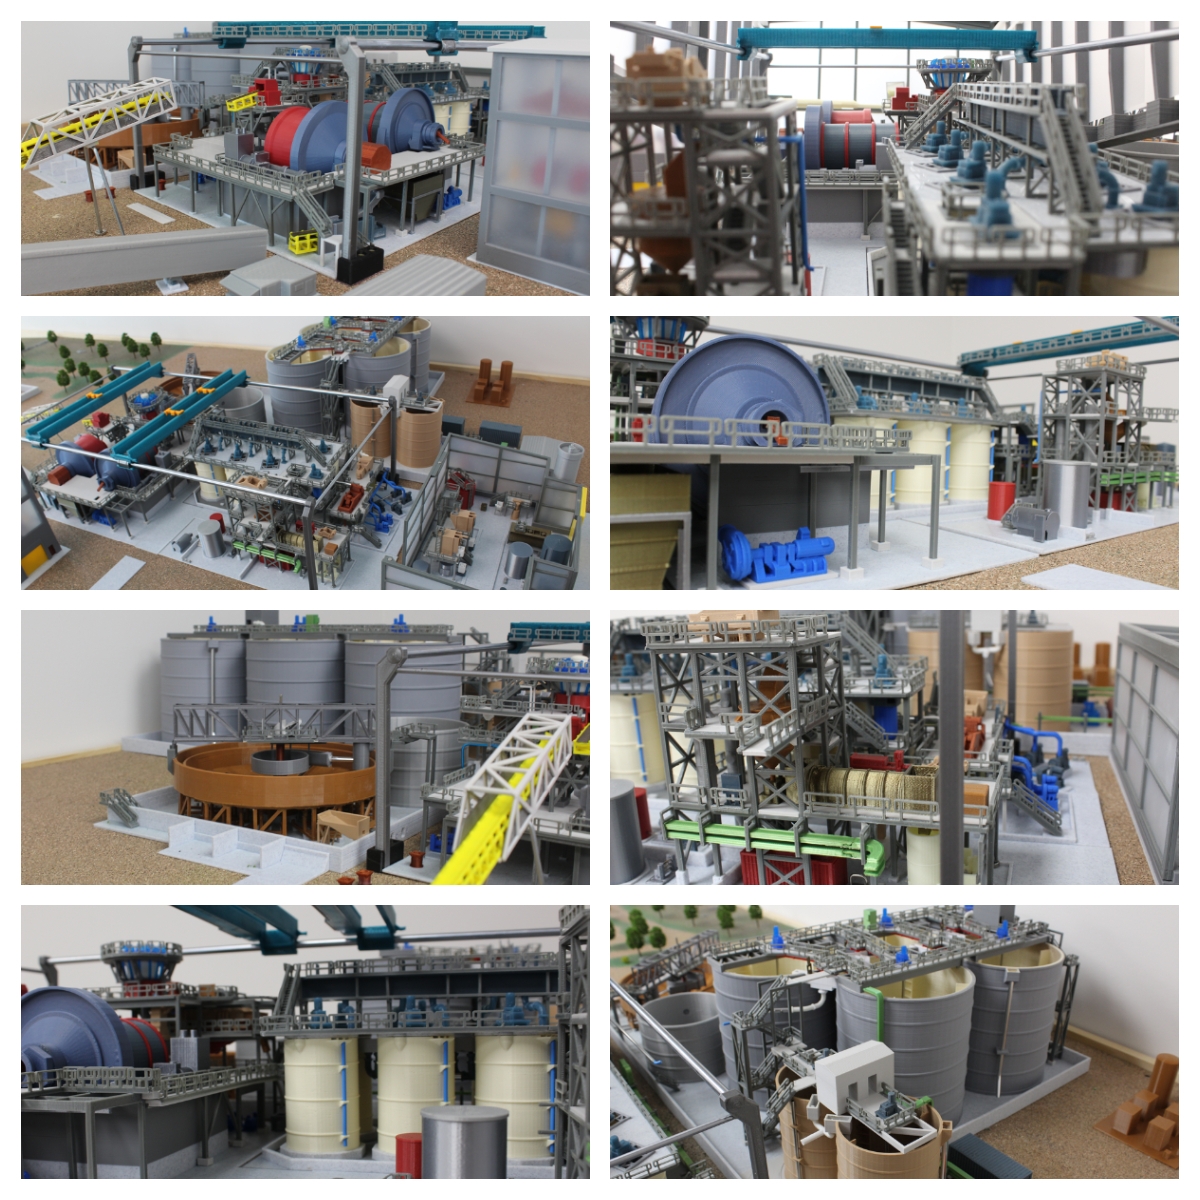 Photos of the 1:1000 scale model of the Magino processing plant and on-site infrastructure